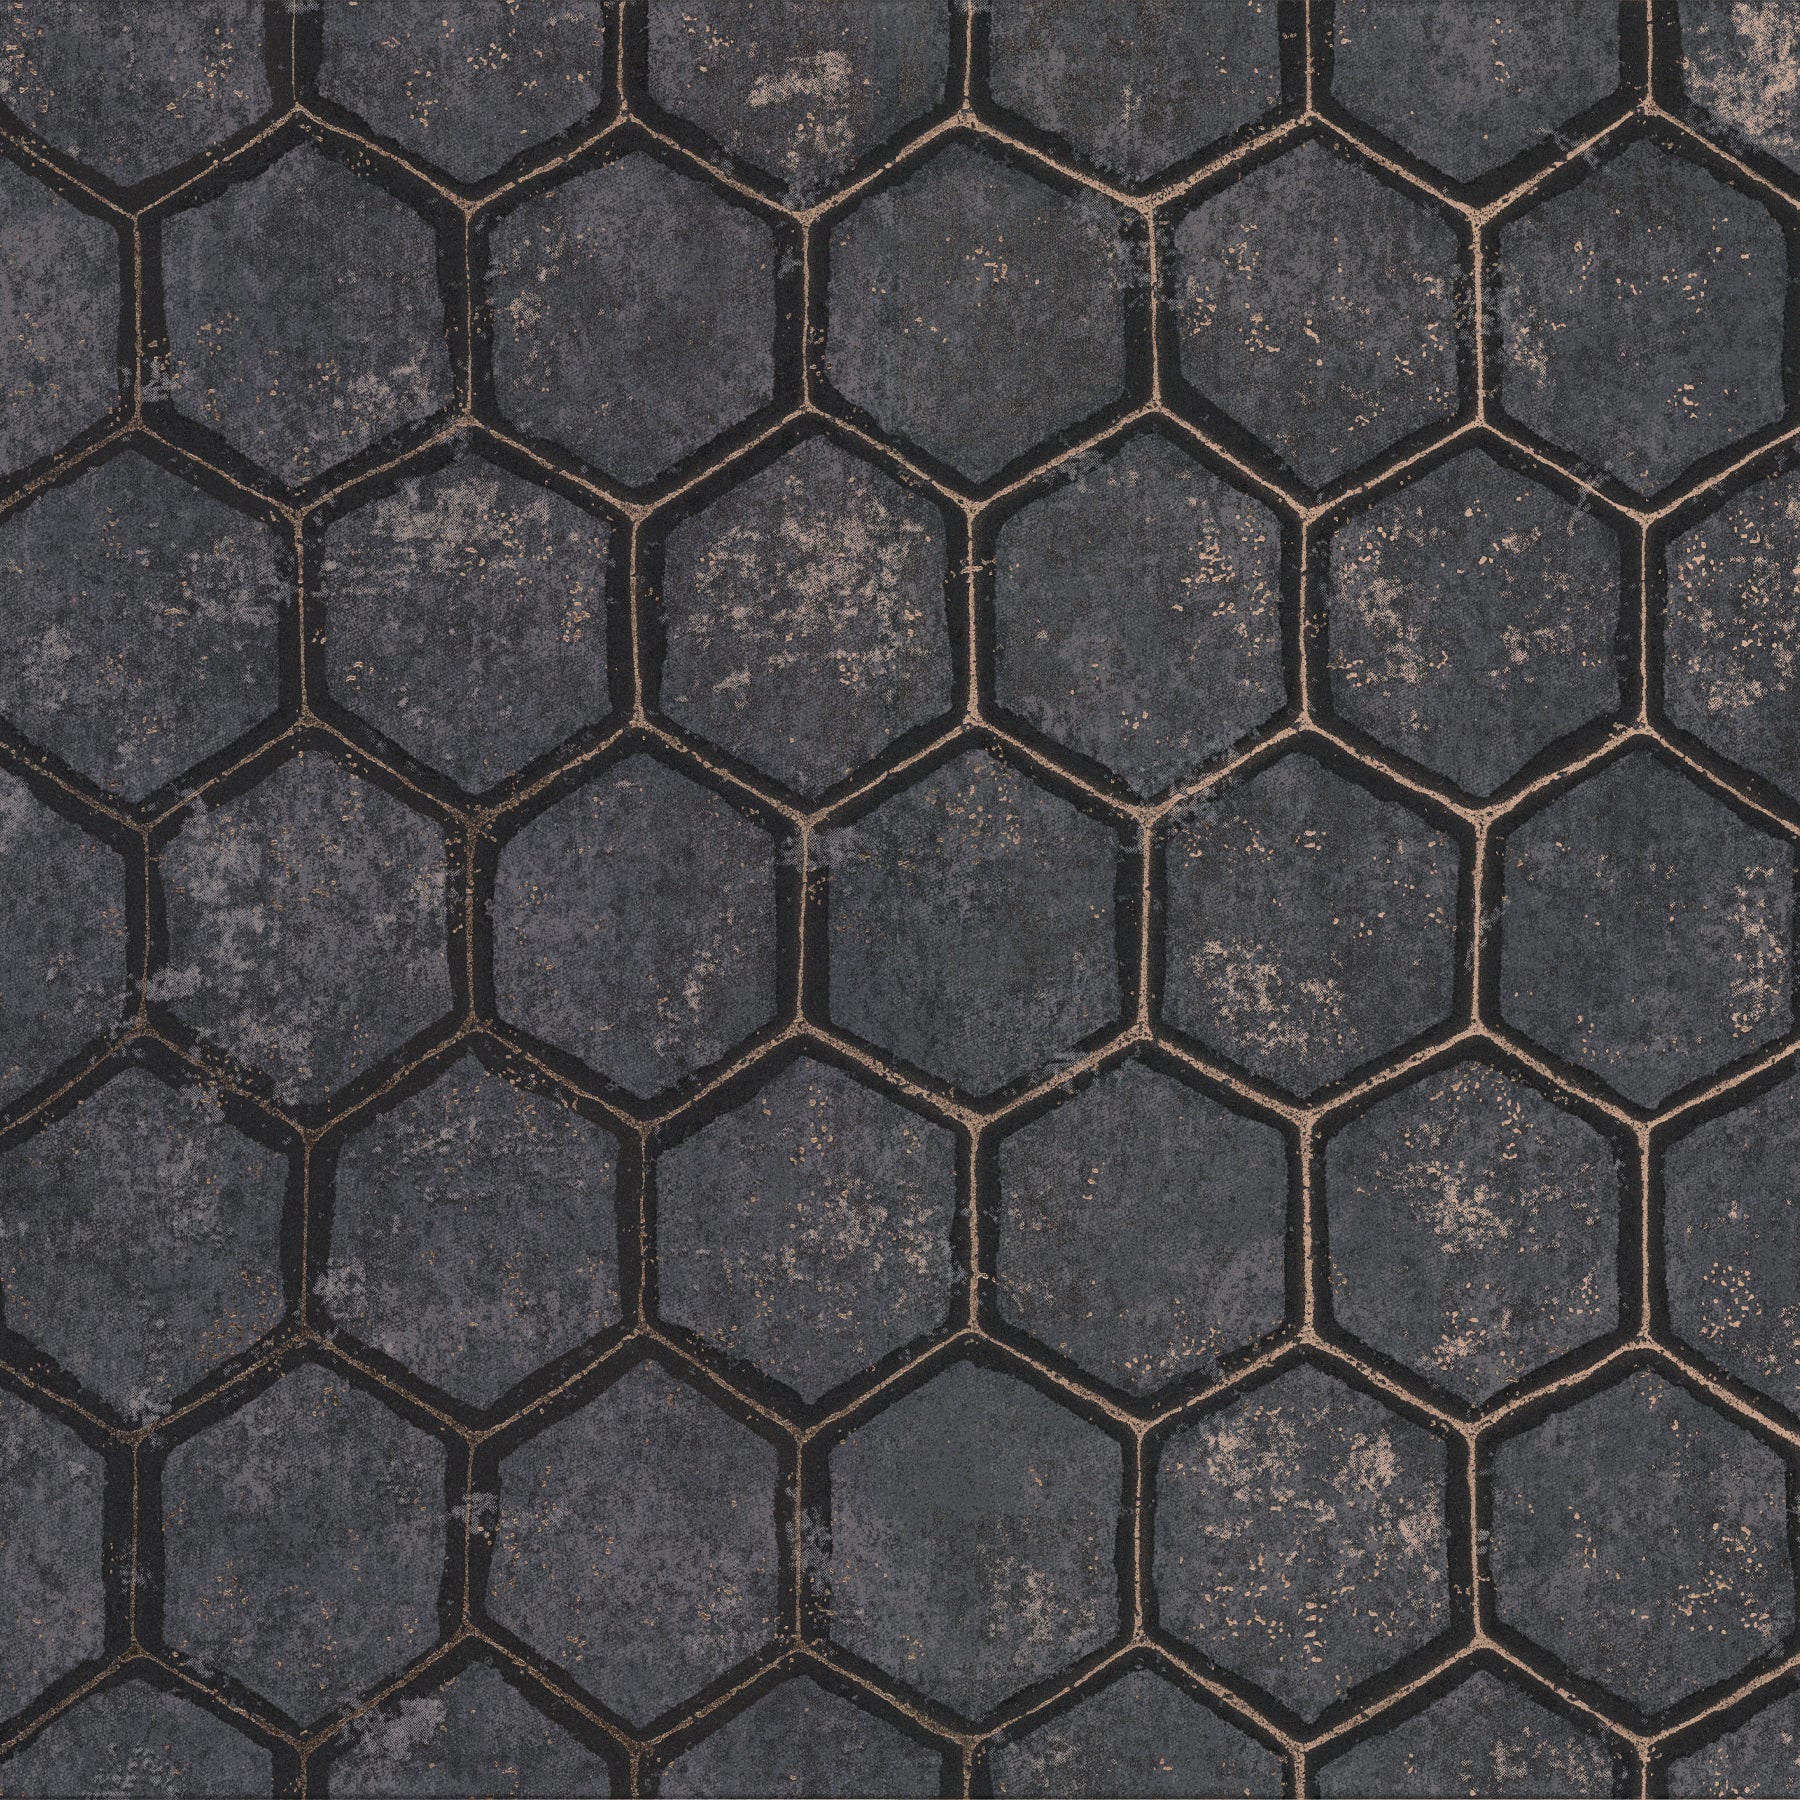 Buy 2927-00403 Polished Starling Charcoal Honeycomb Charcoal Brewster Wallpaper